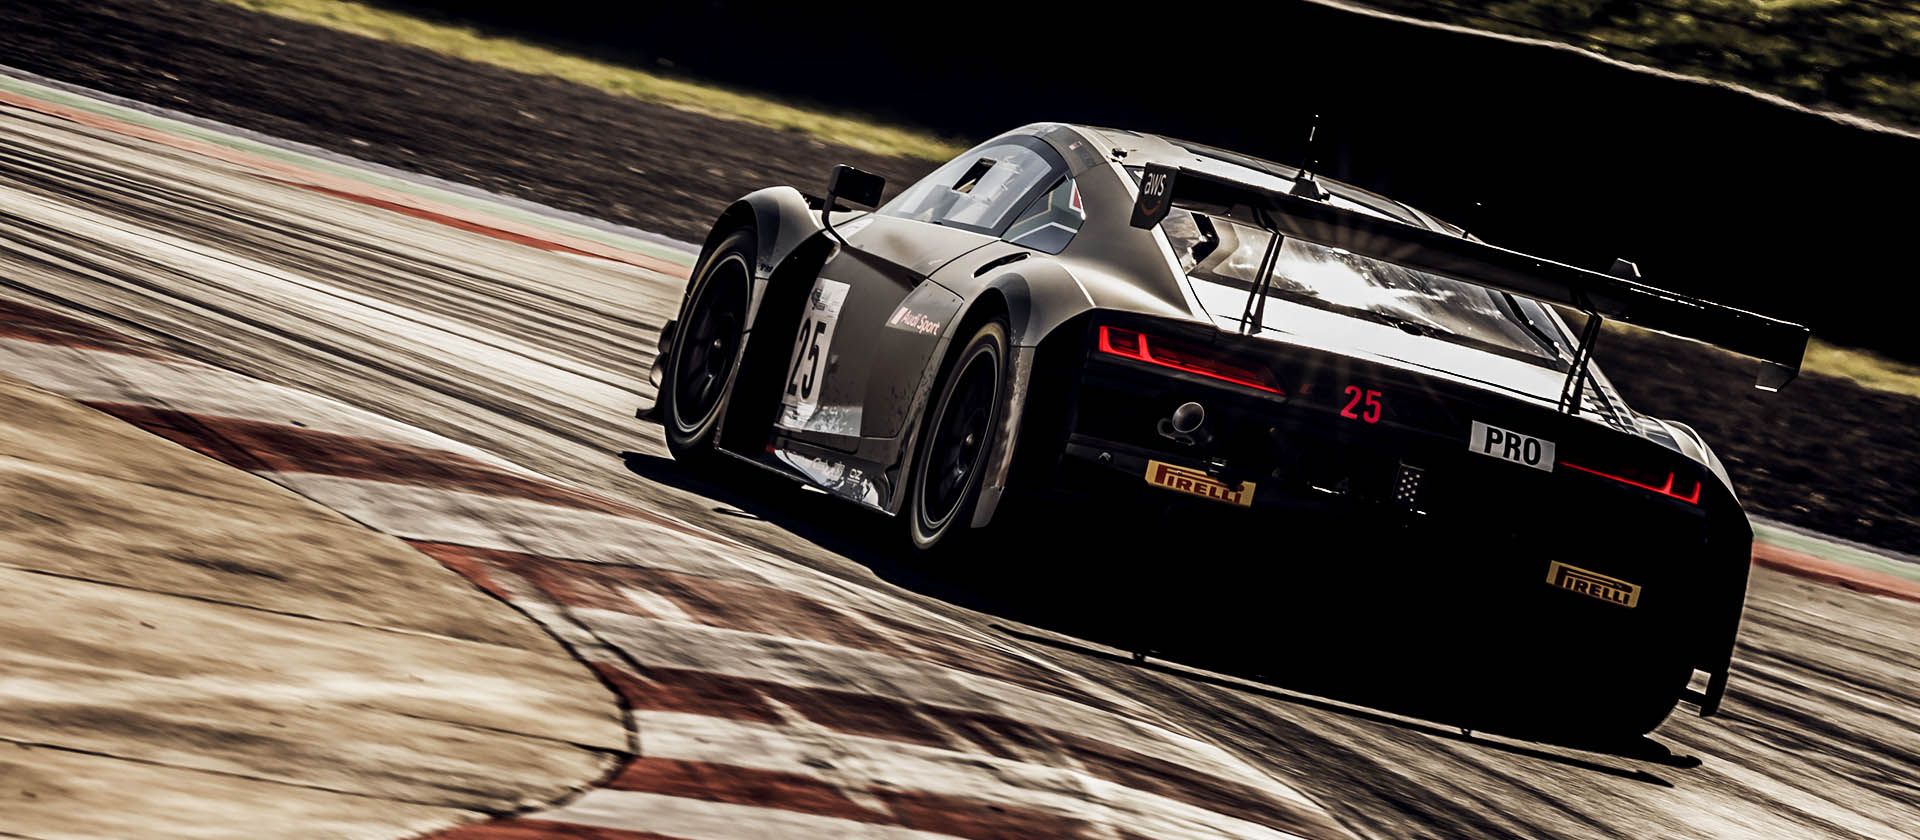 Audi R8 LMS on the race track